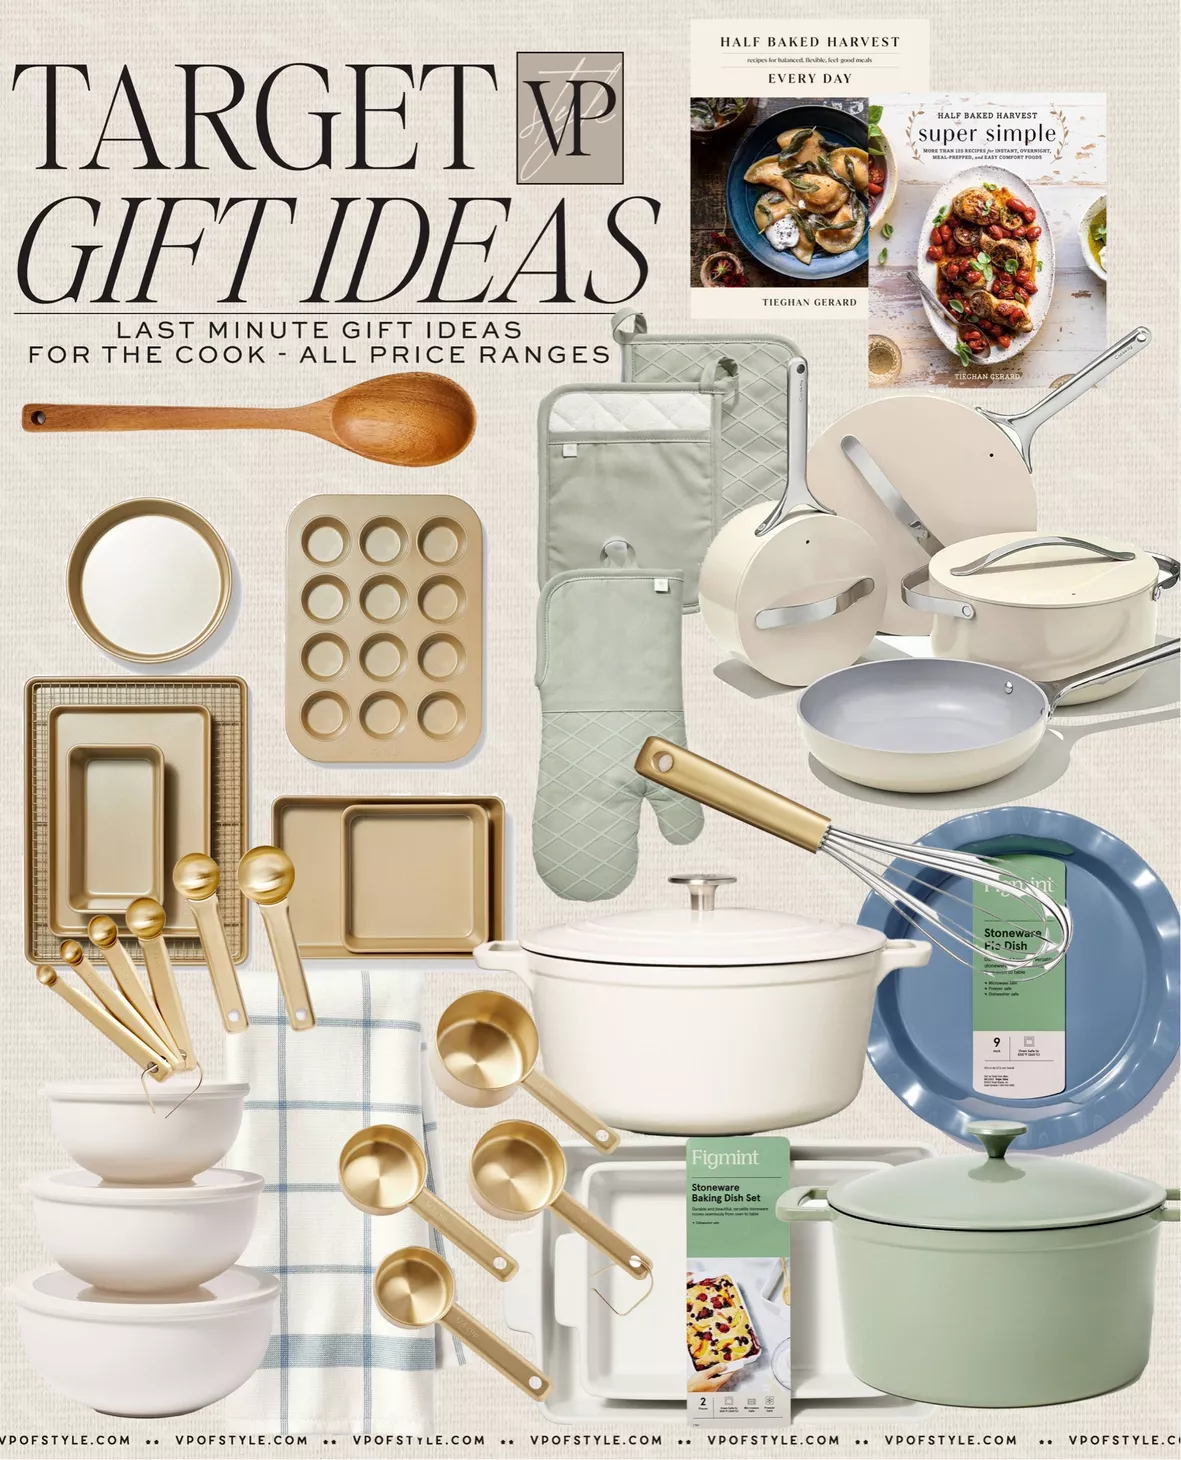 Gifts for Cooks: Every Price Range